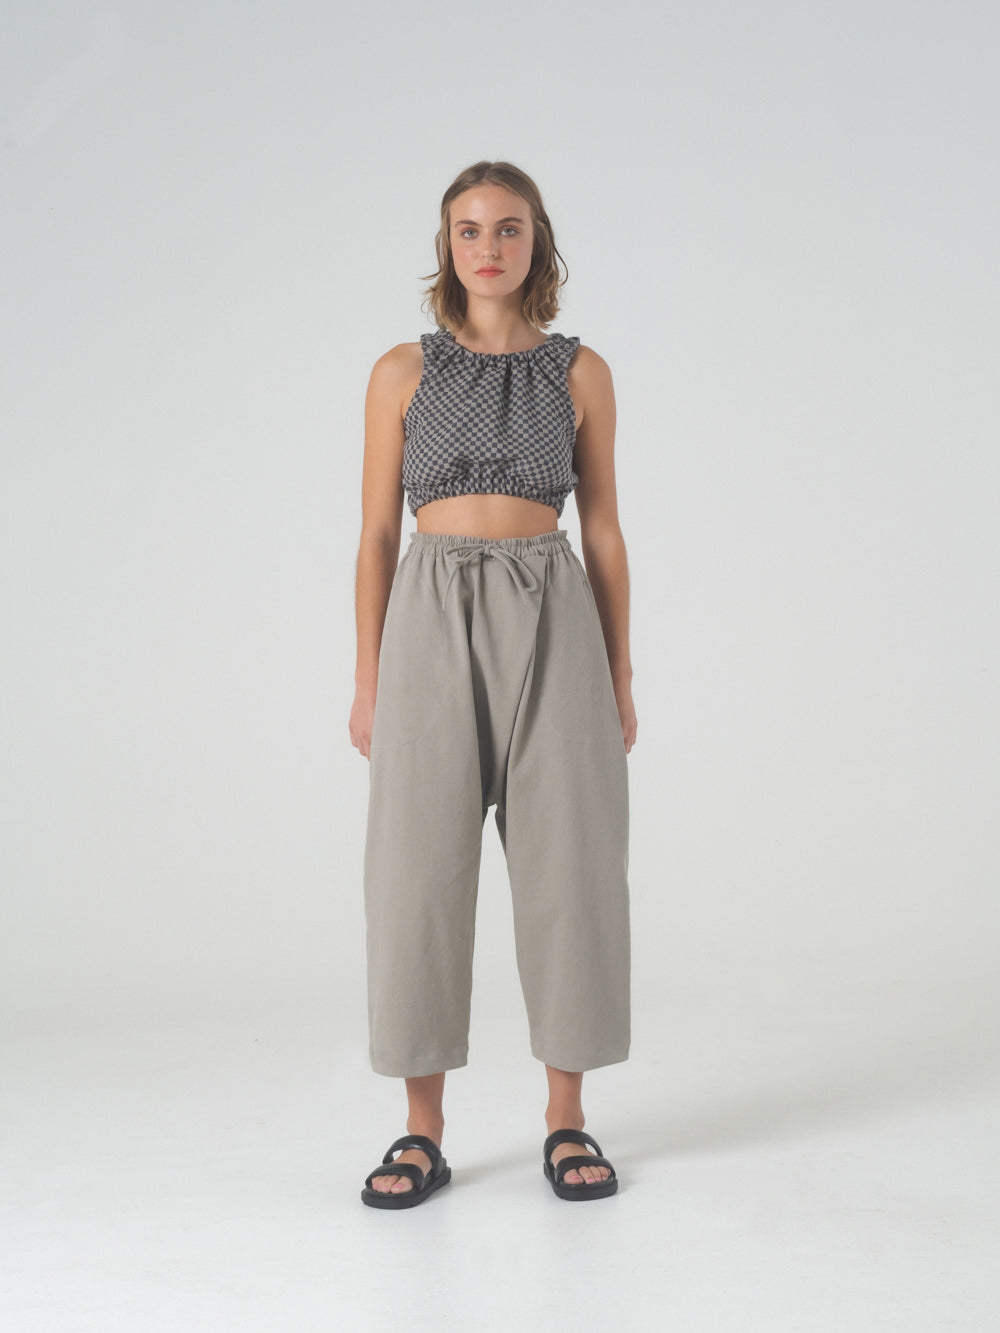 SAMPLE SALE - Nuria Pant in Stone - SMALL/STANDARD